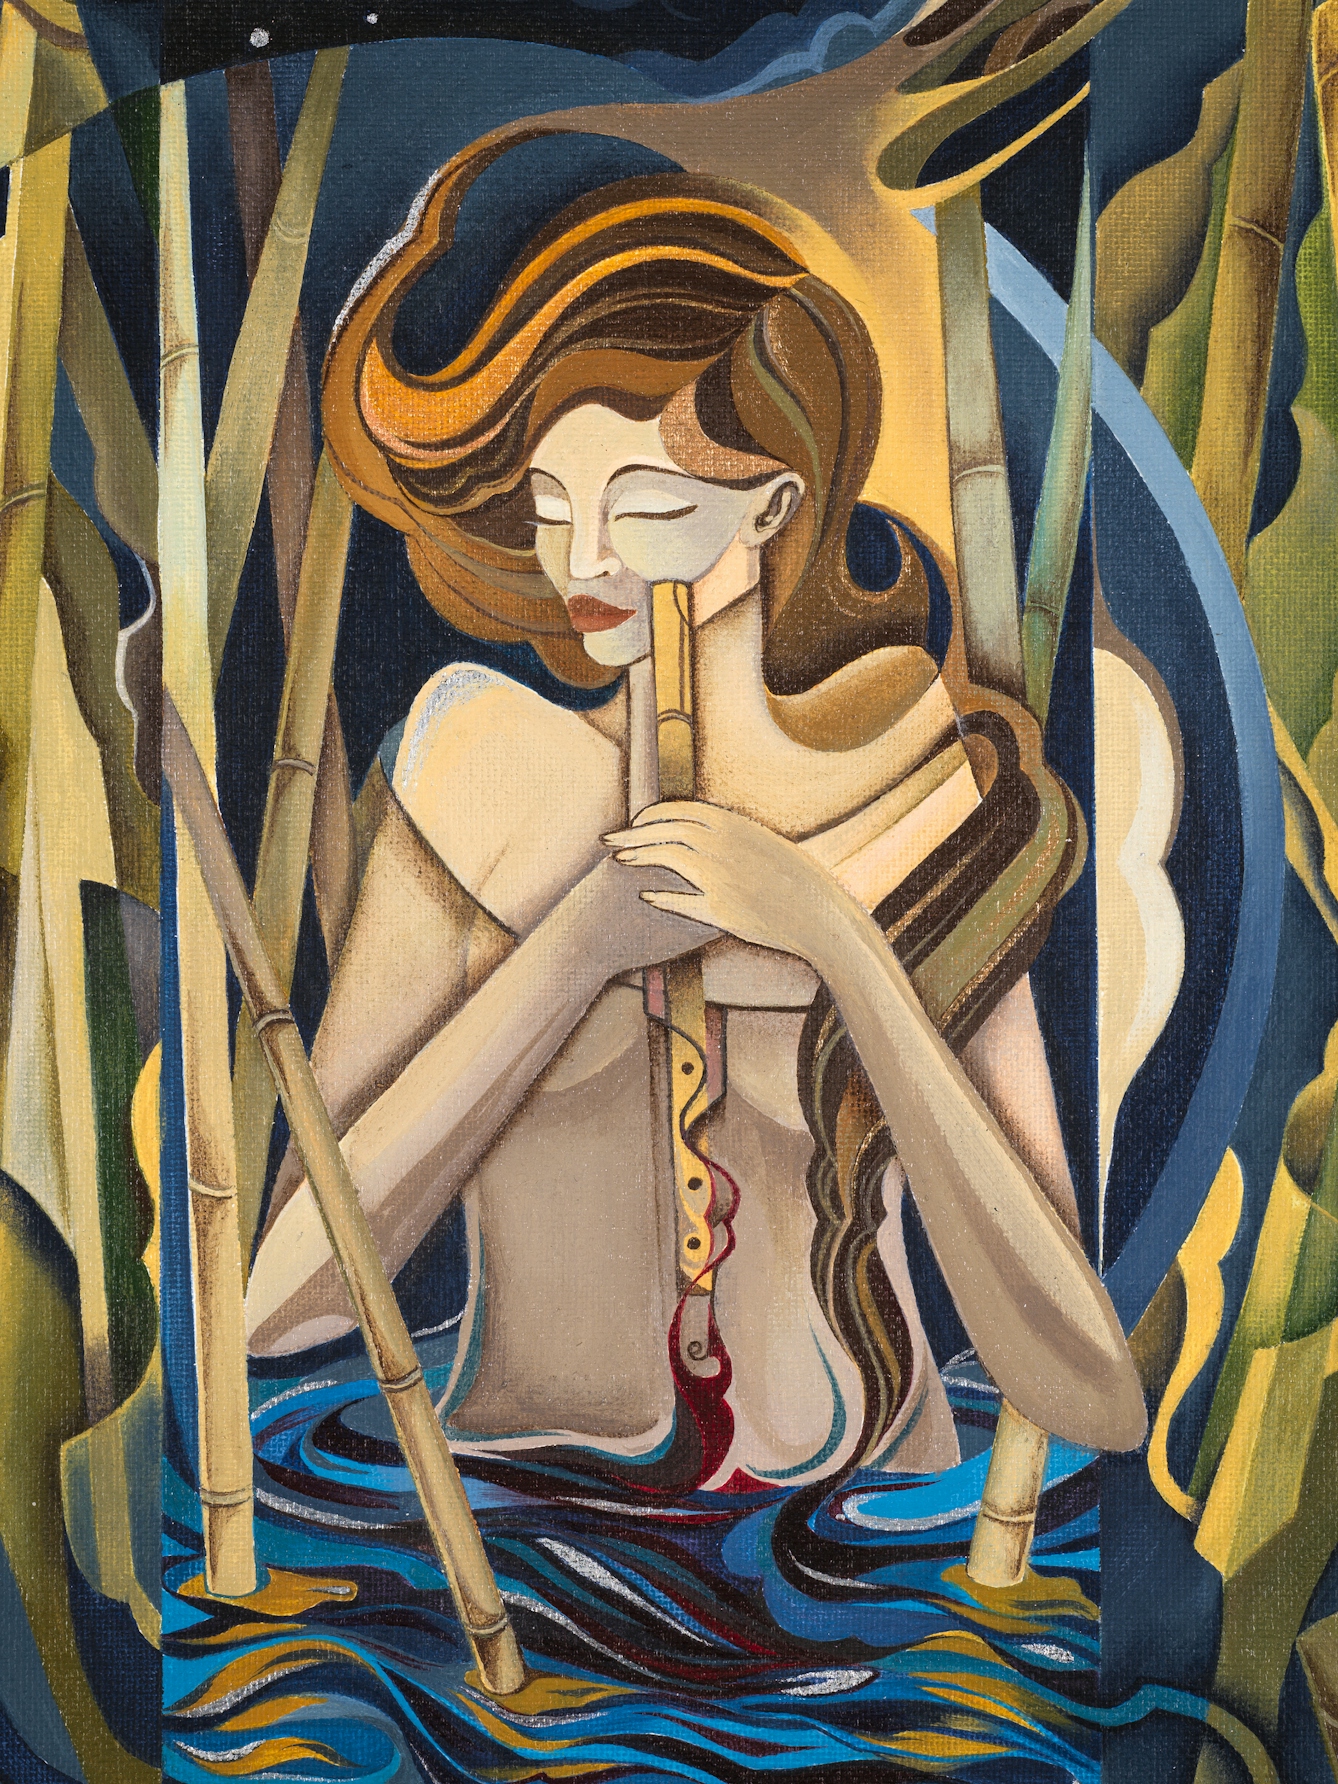 Artwork in acrylic paint on canvas showing a stylistic portrayal of a woman stood waist high in water. She is surrounded in the water by reeds and a bright moon shines down from the night sky above her. She seems to be holding a cut stem from one of the reeds, which she is holding in front of her in both hands. Her eyes are closed.